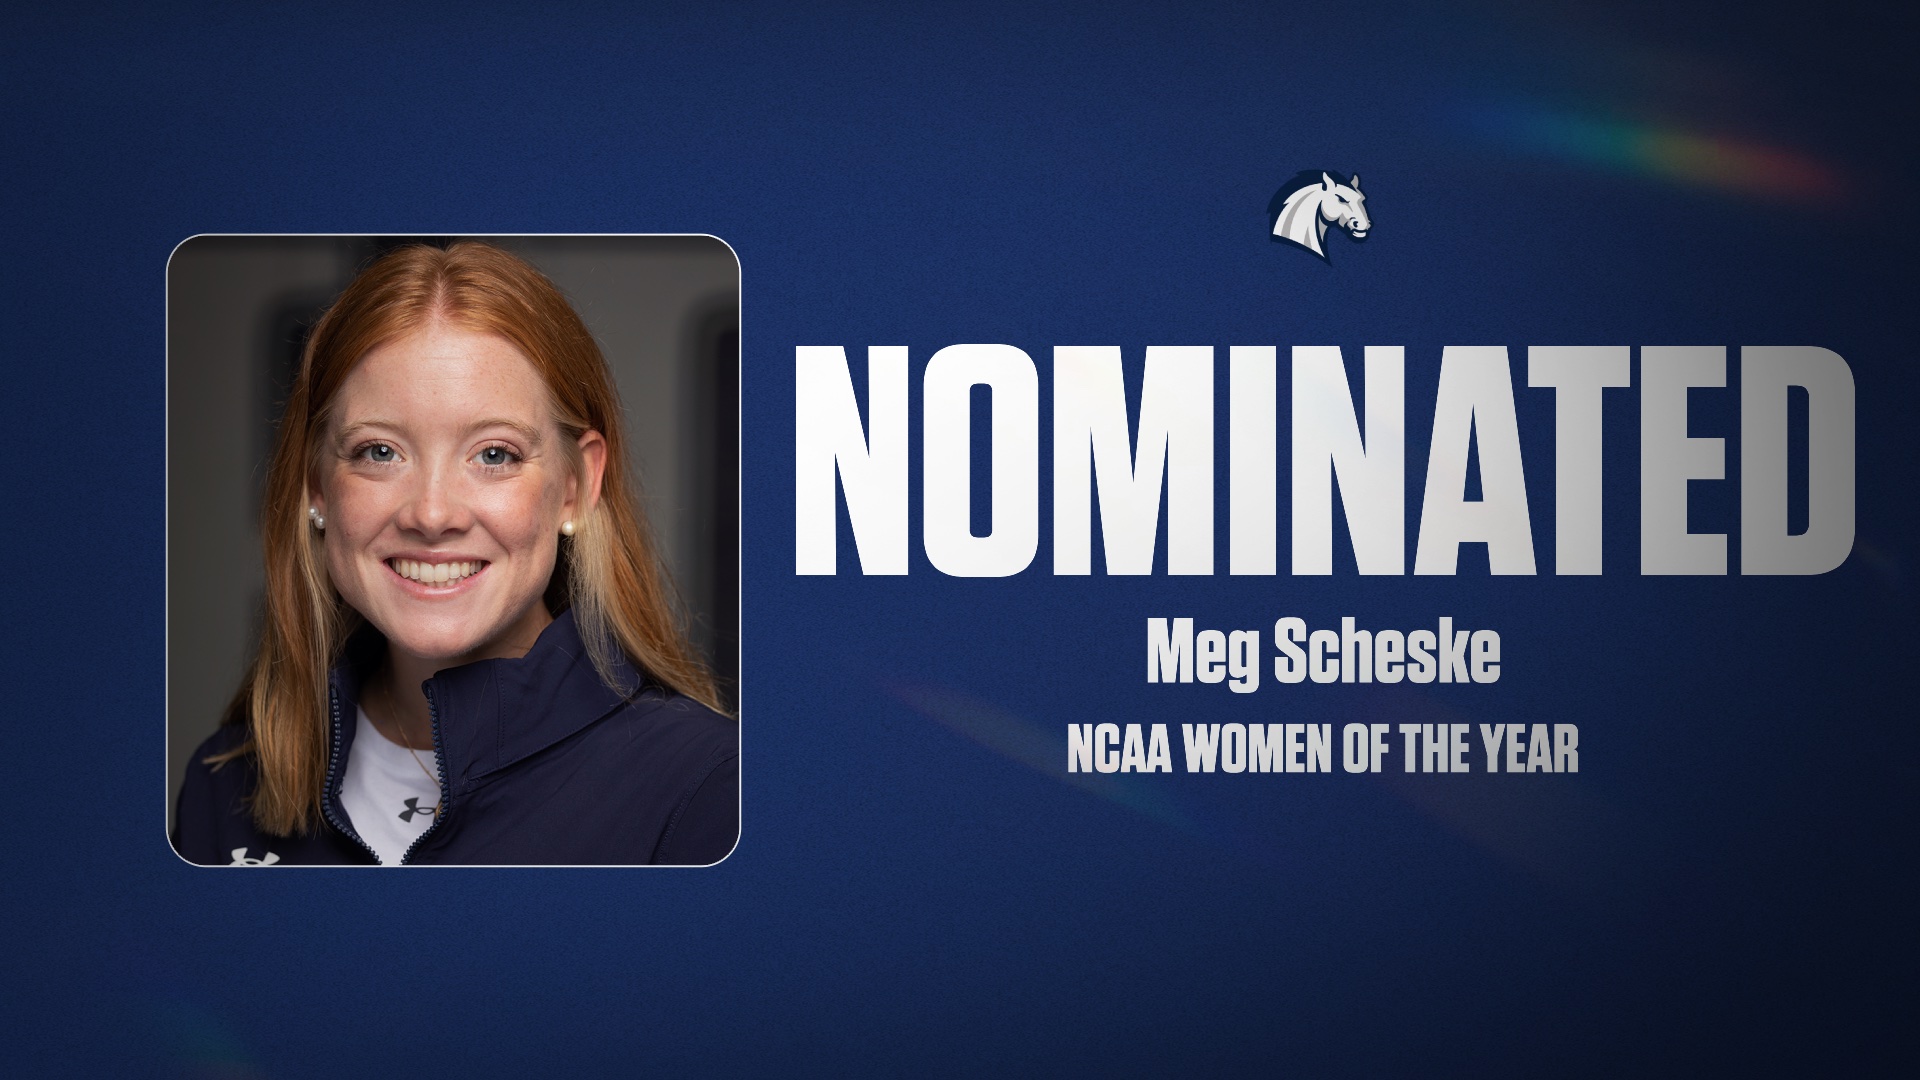 Hillsdale College's Margaret Scheske nominated for NCAA Woman of the Year Award